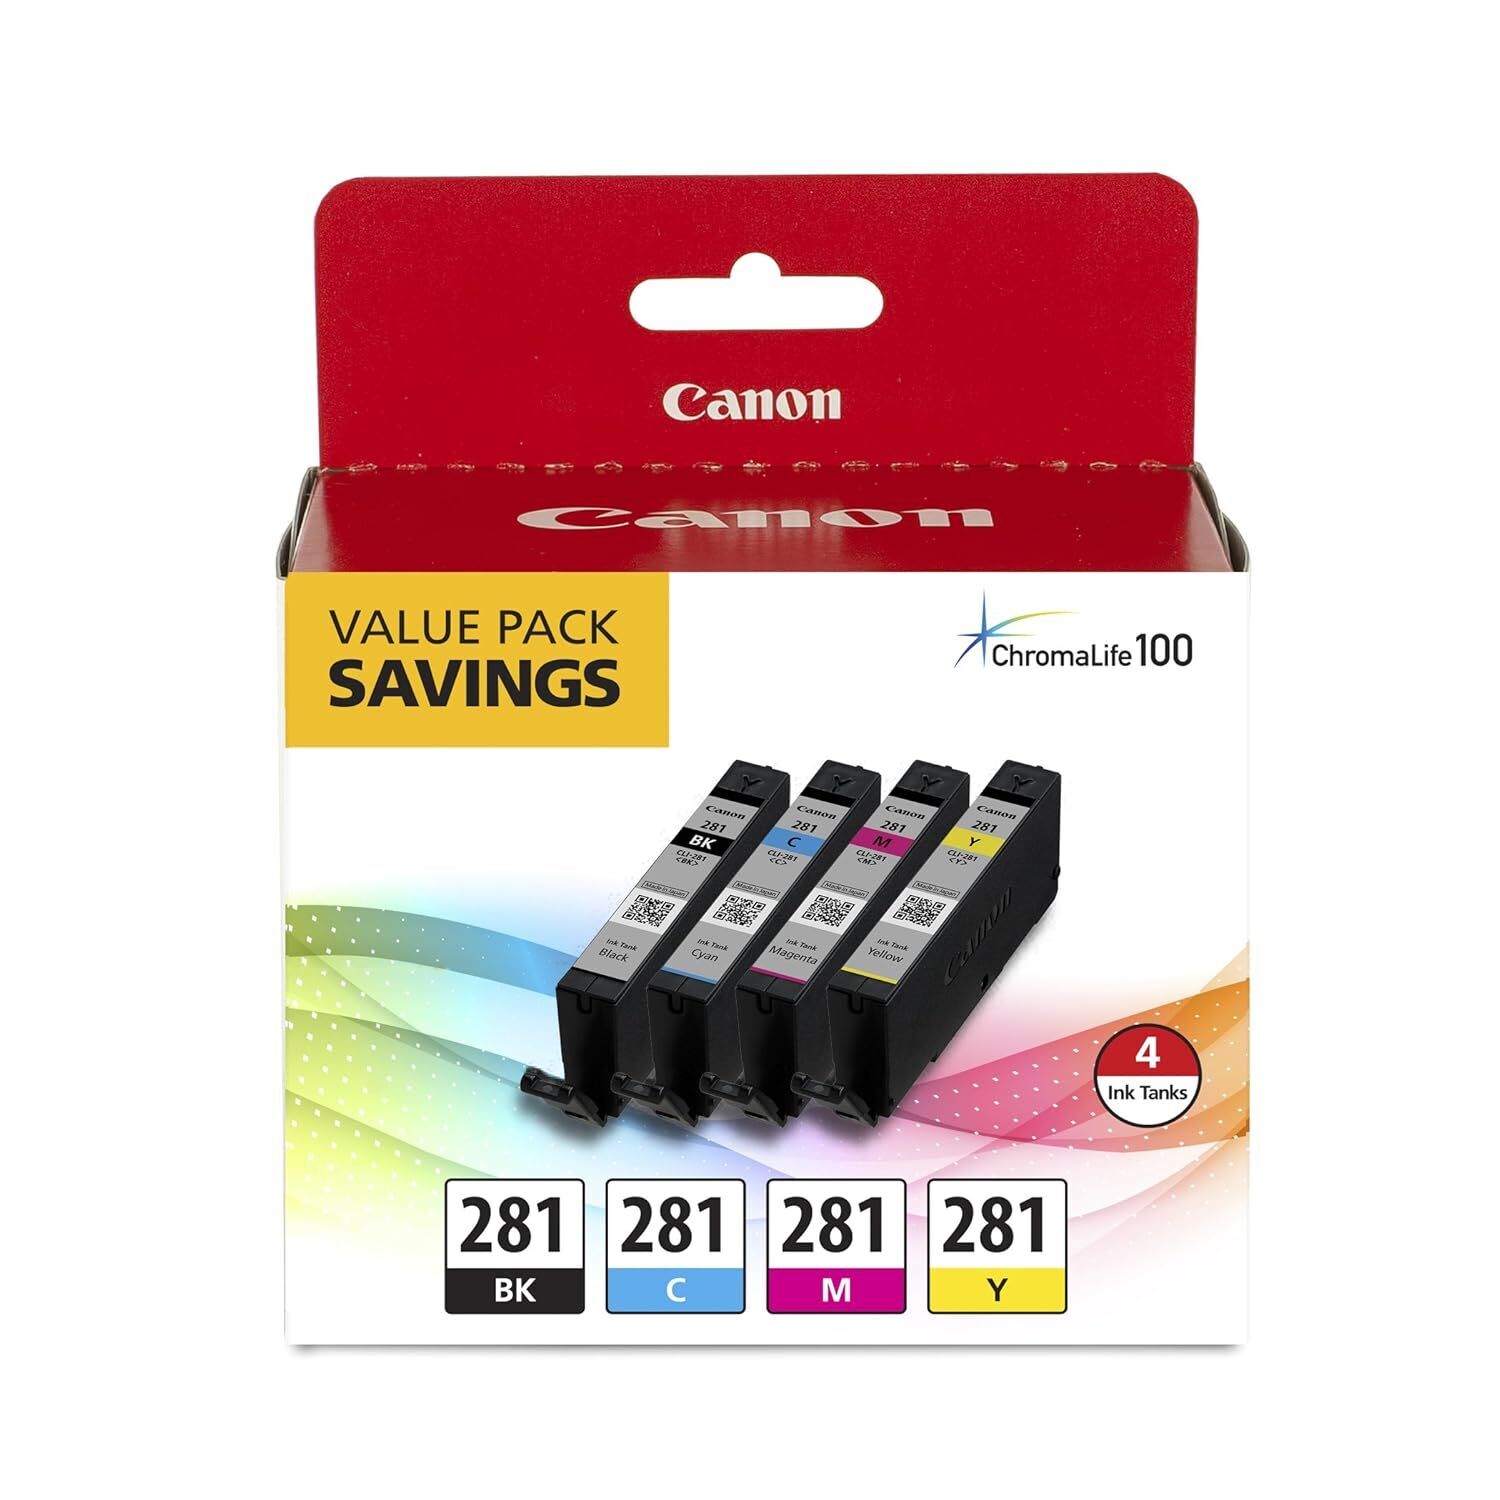 Canon CLI-281 XL BKCMY Four Color Value Pack Compatible to TR8520, TR7520, TS9